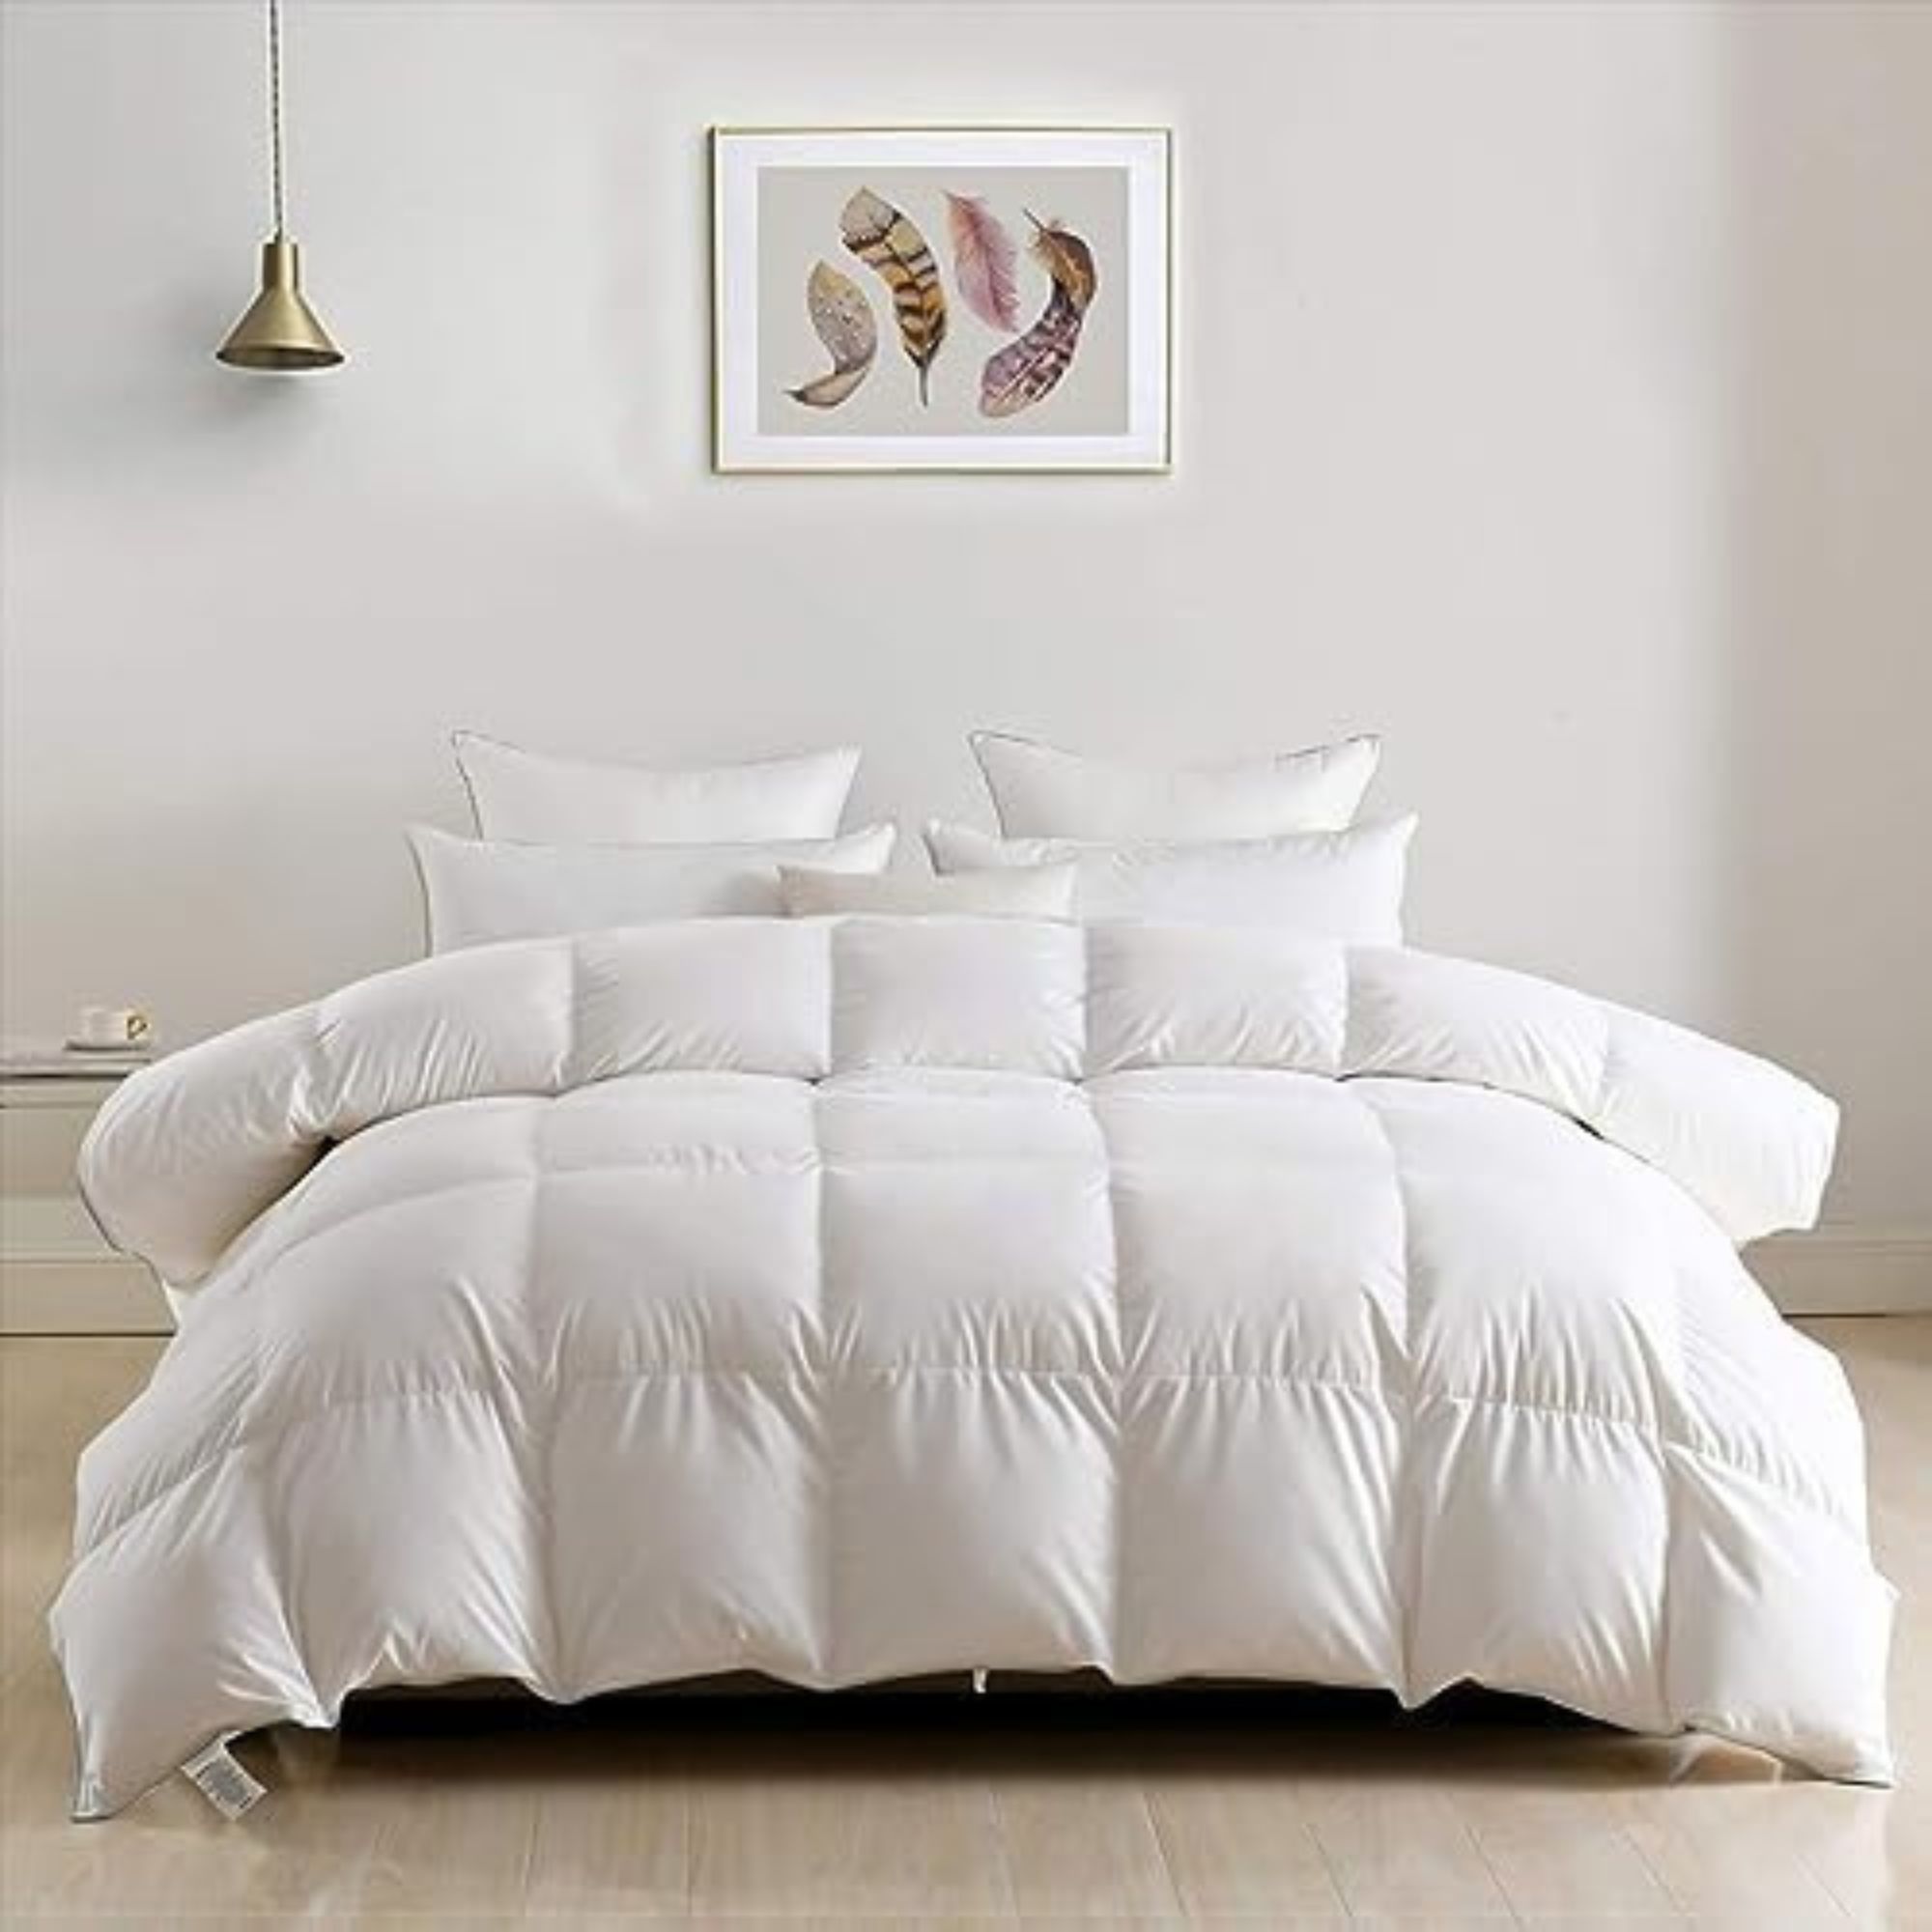 DWR Luxury King Down Comforter on a bed against a white wall.